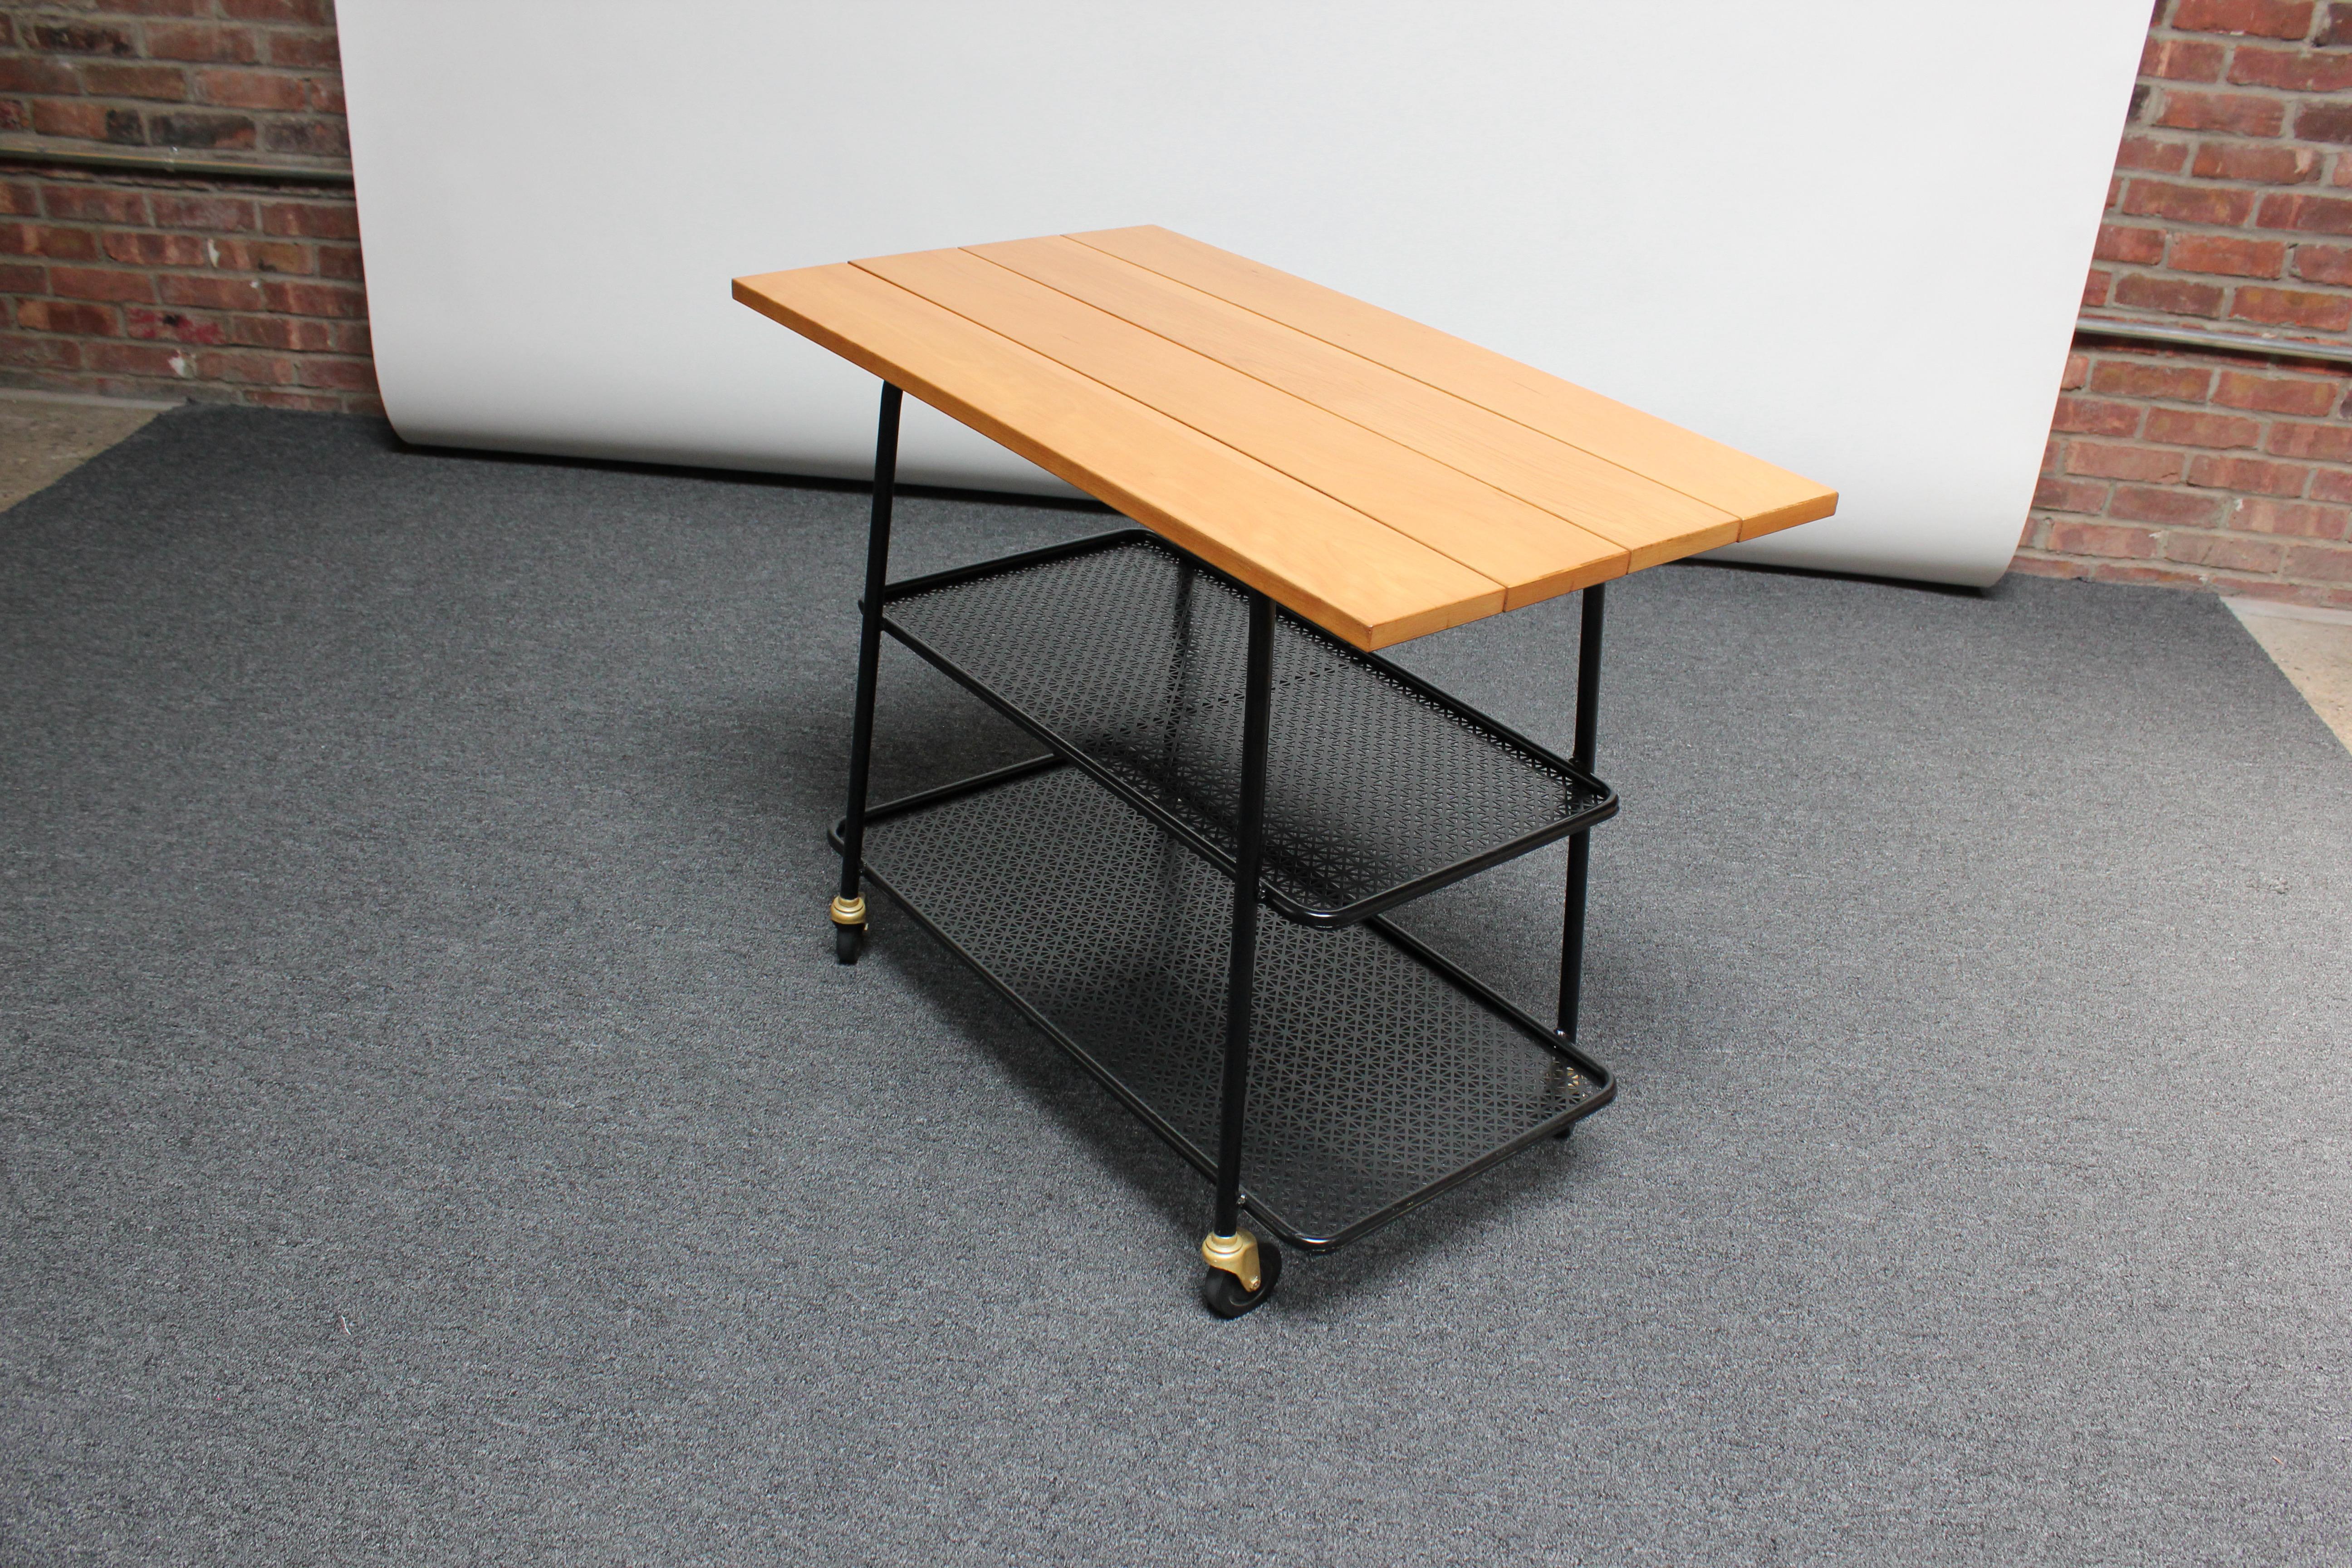 Mid-century bar cart / tea trolley featuring two perforated steel tiers and a solid maple plank surface.
The maple adds a nice contrast to the black painted steel.
Maple has been refinished, and the piece is in excellent, vintage condition; only